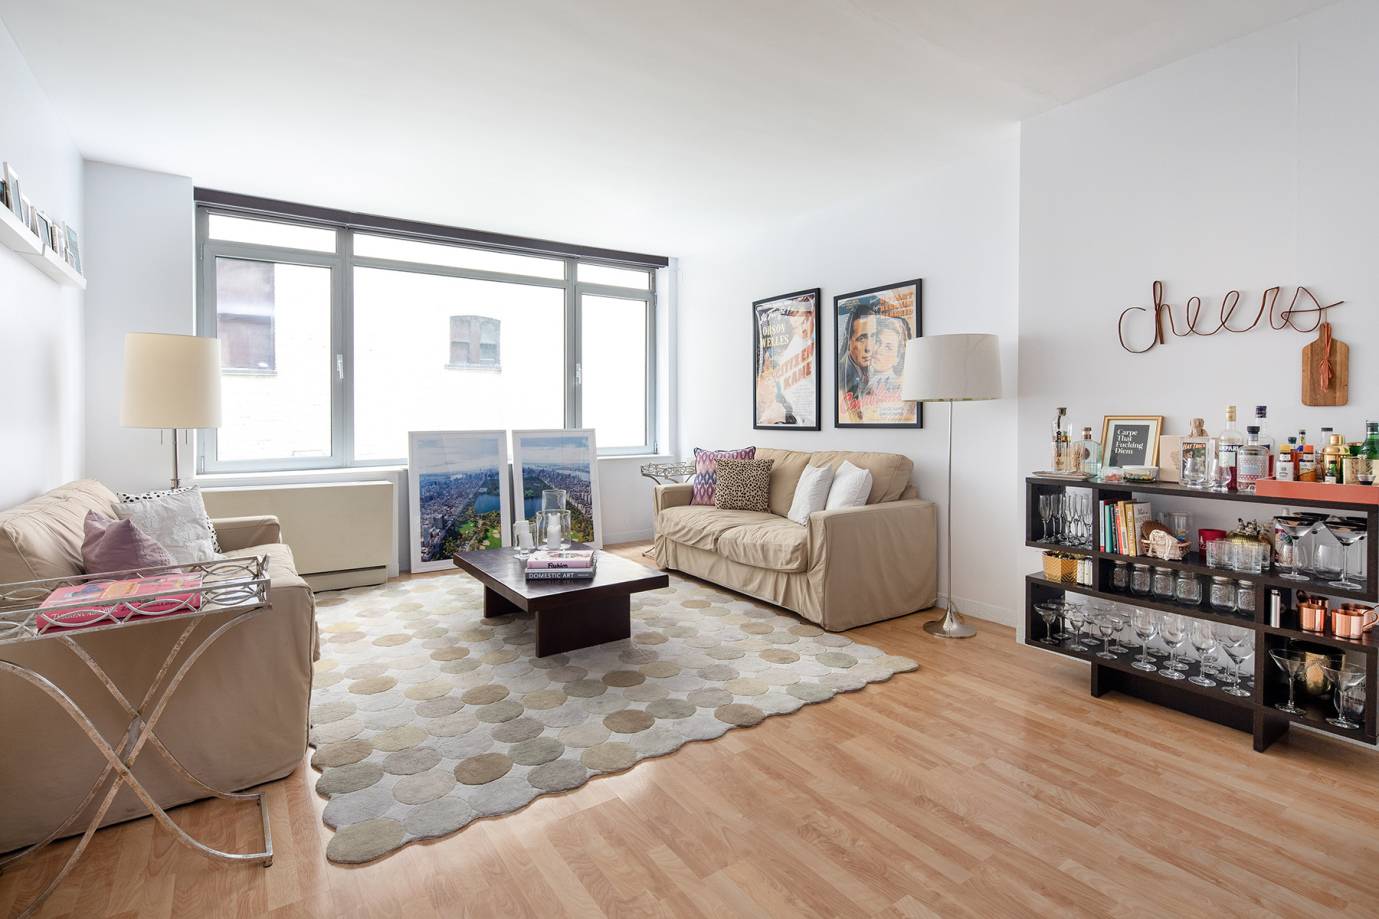 NEW PRICE ! ! CHELSEA Unit 2C, a rarely available oversized one bedroom apartment in a boutique condominium on one of the most coveted and convenient blocks in Chelsea, is ...